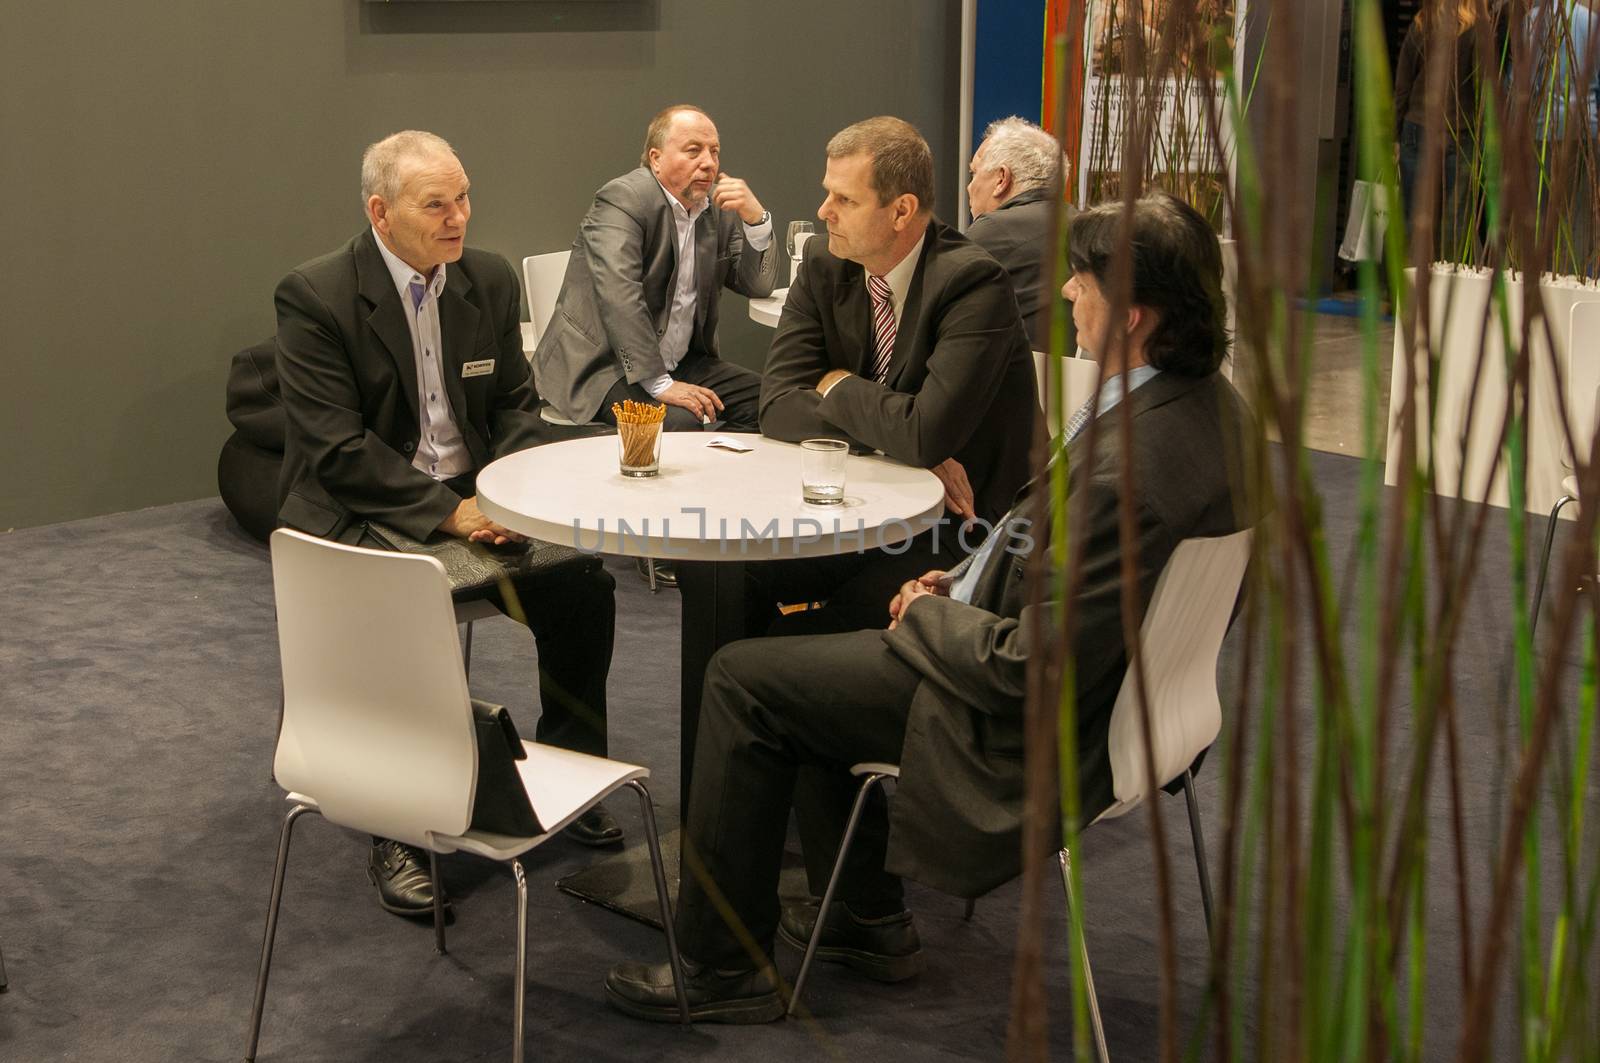 Business men having a meeting while attending an event at the convention trade center in Brno. BVV Brno Exhibition center. Czech Republic